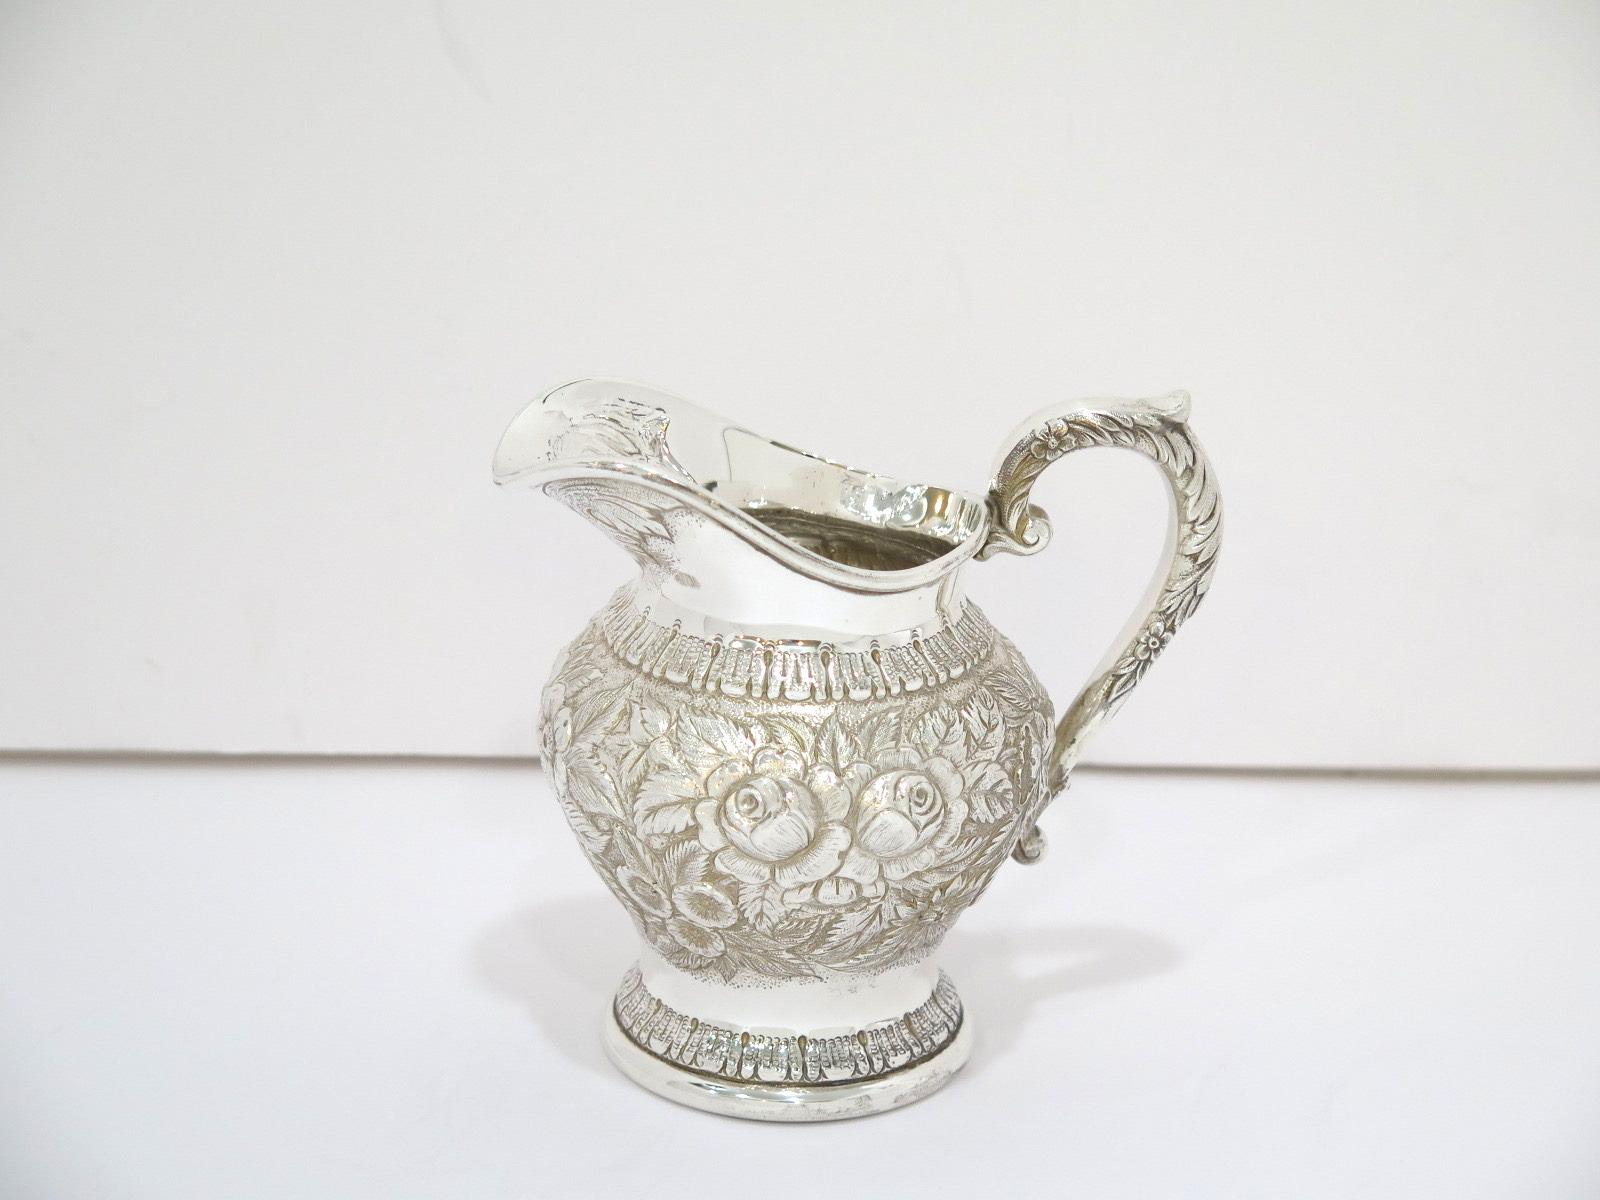 4 Pc Sterling Silver S. Kirk & Son Vintage Floral Repousse Tea / Coffee Service For Sale 3